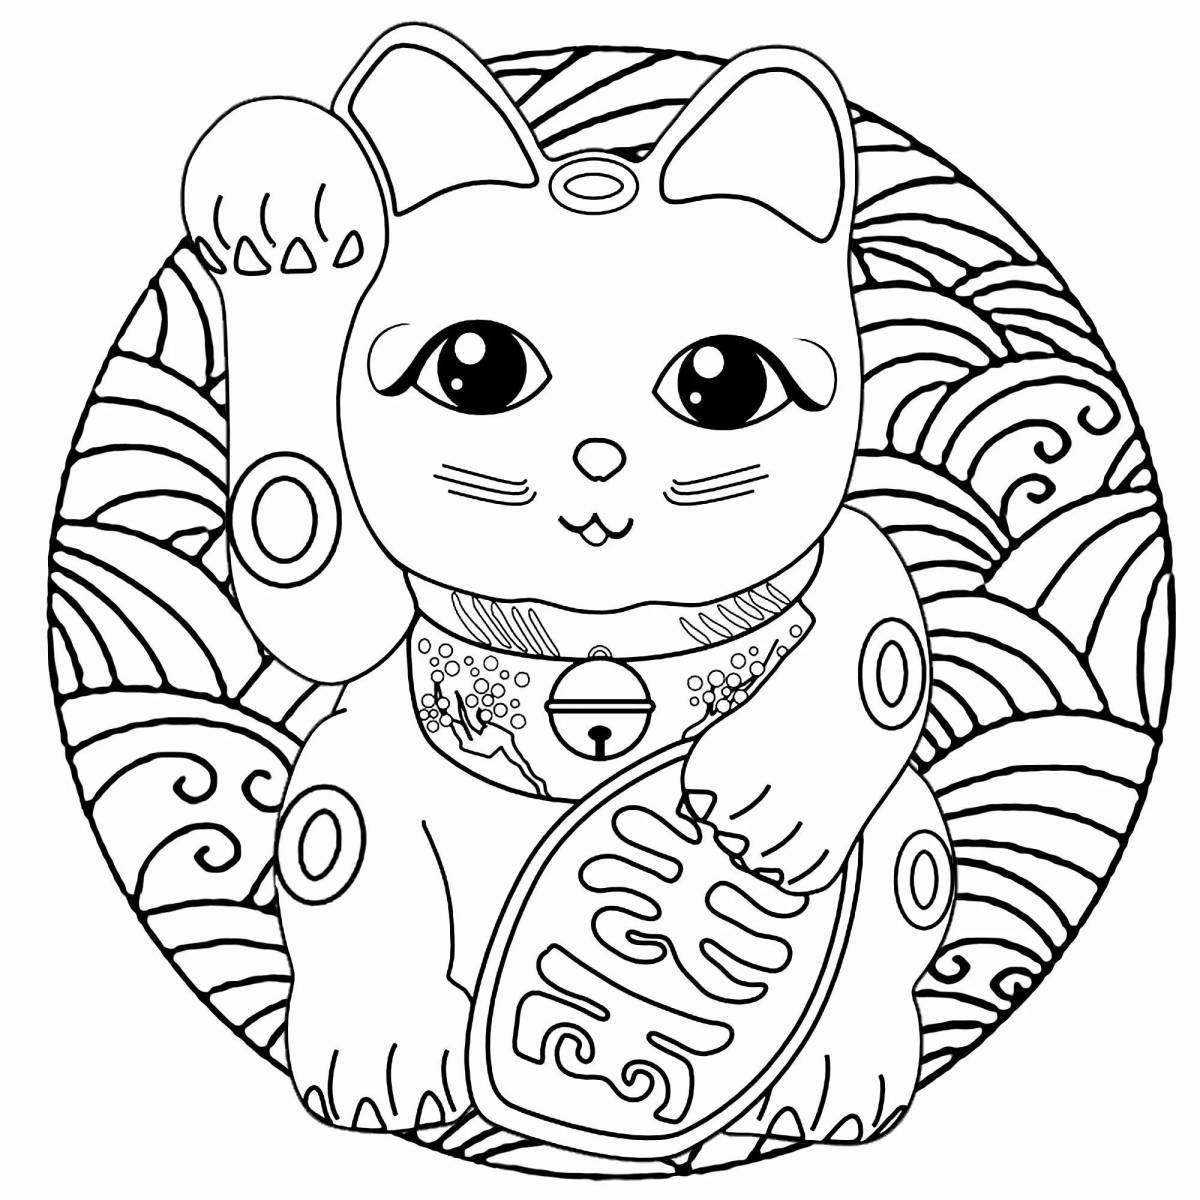 Intriguing amulet coloring page